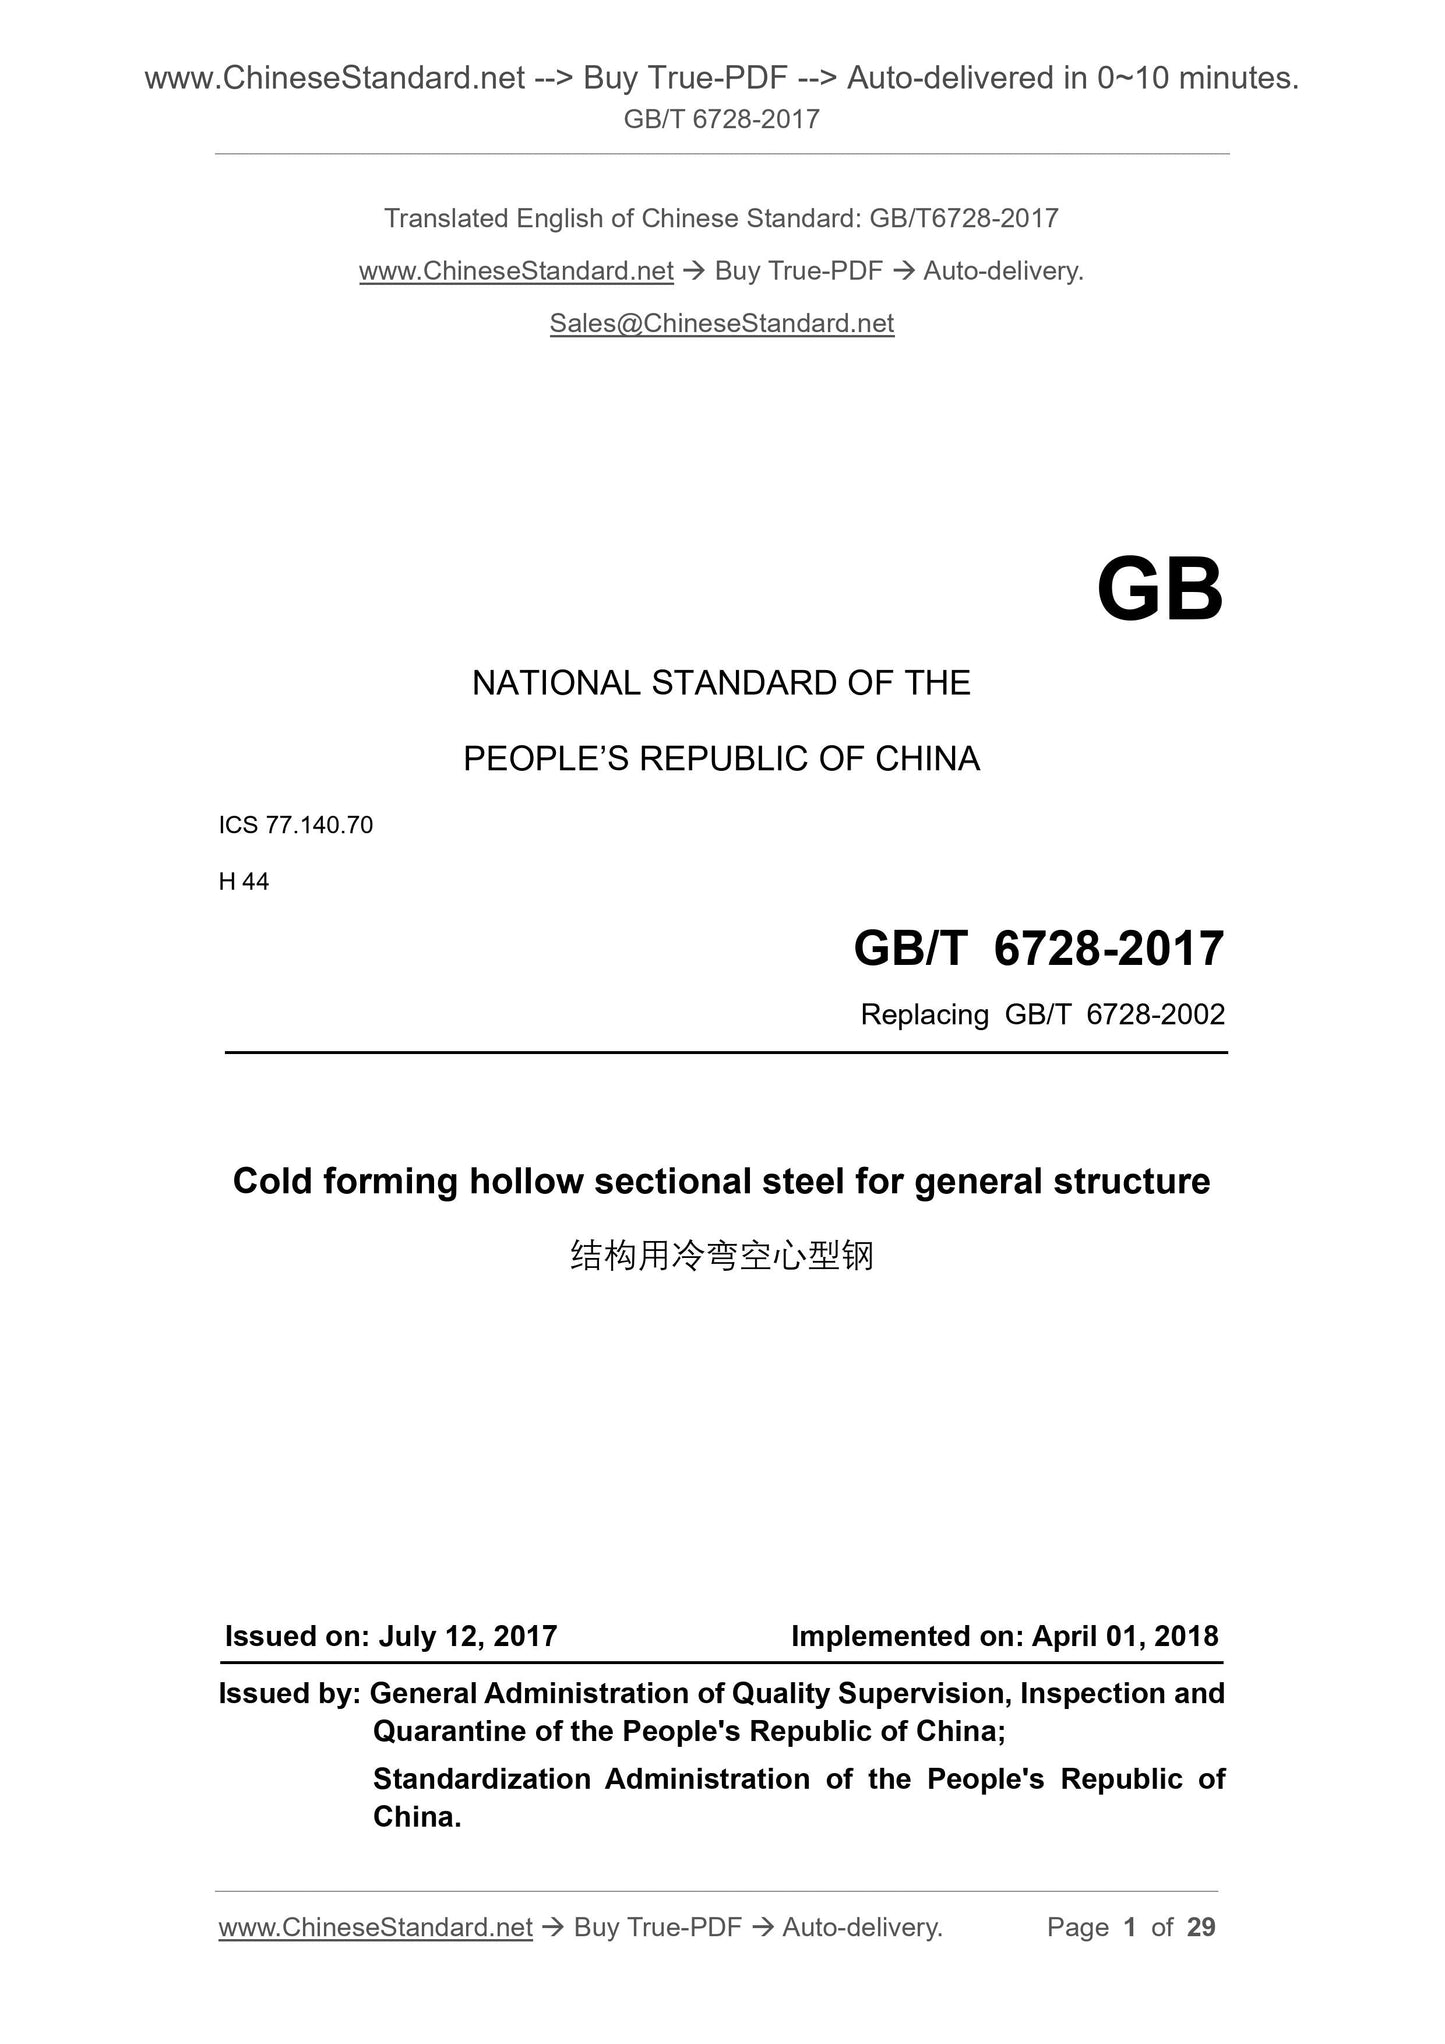 GB/T 6728-2017 Page 1